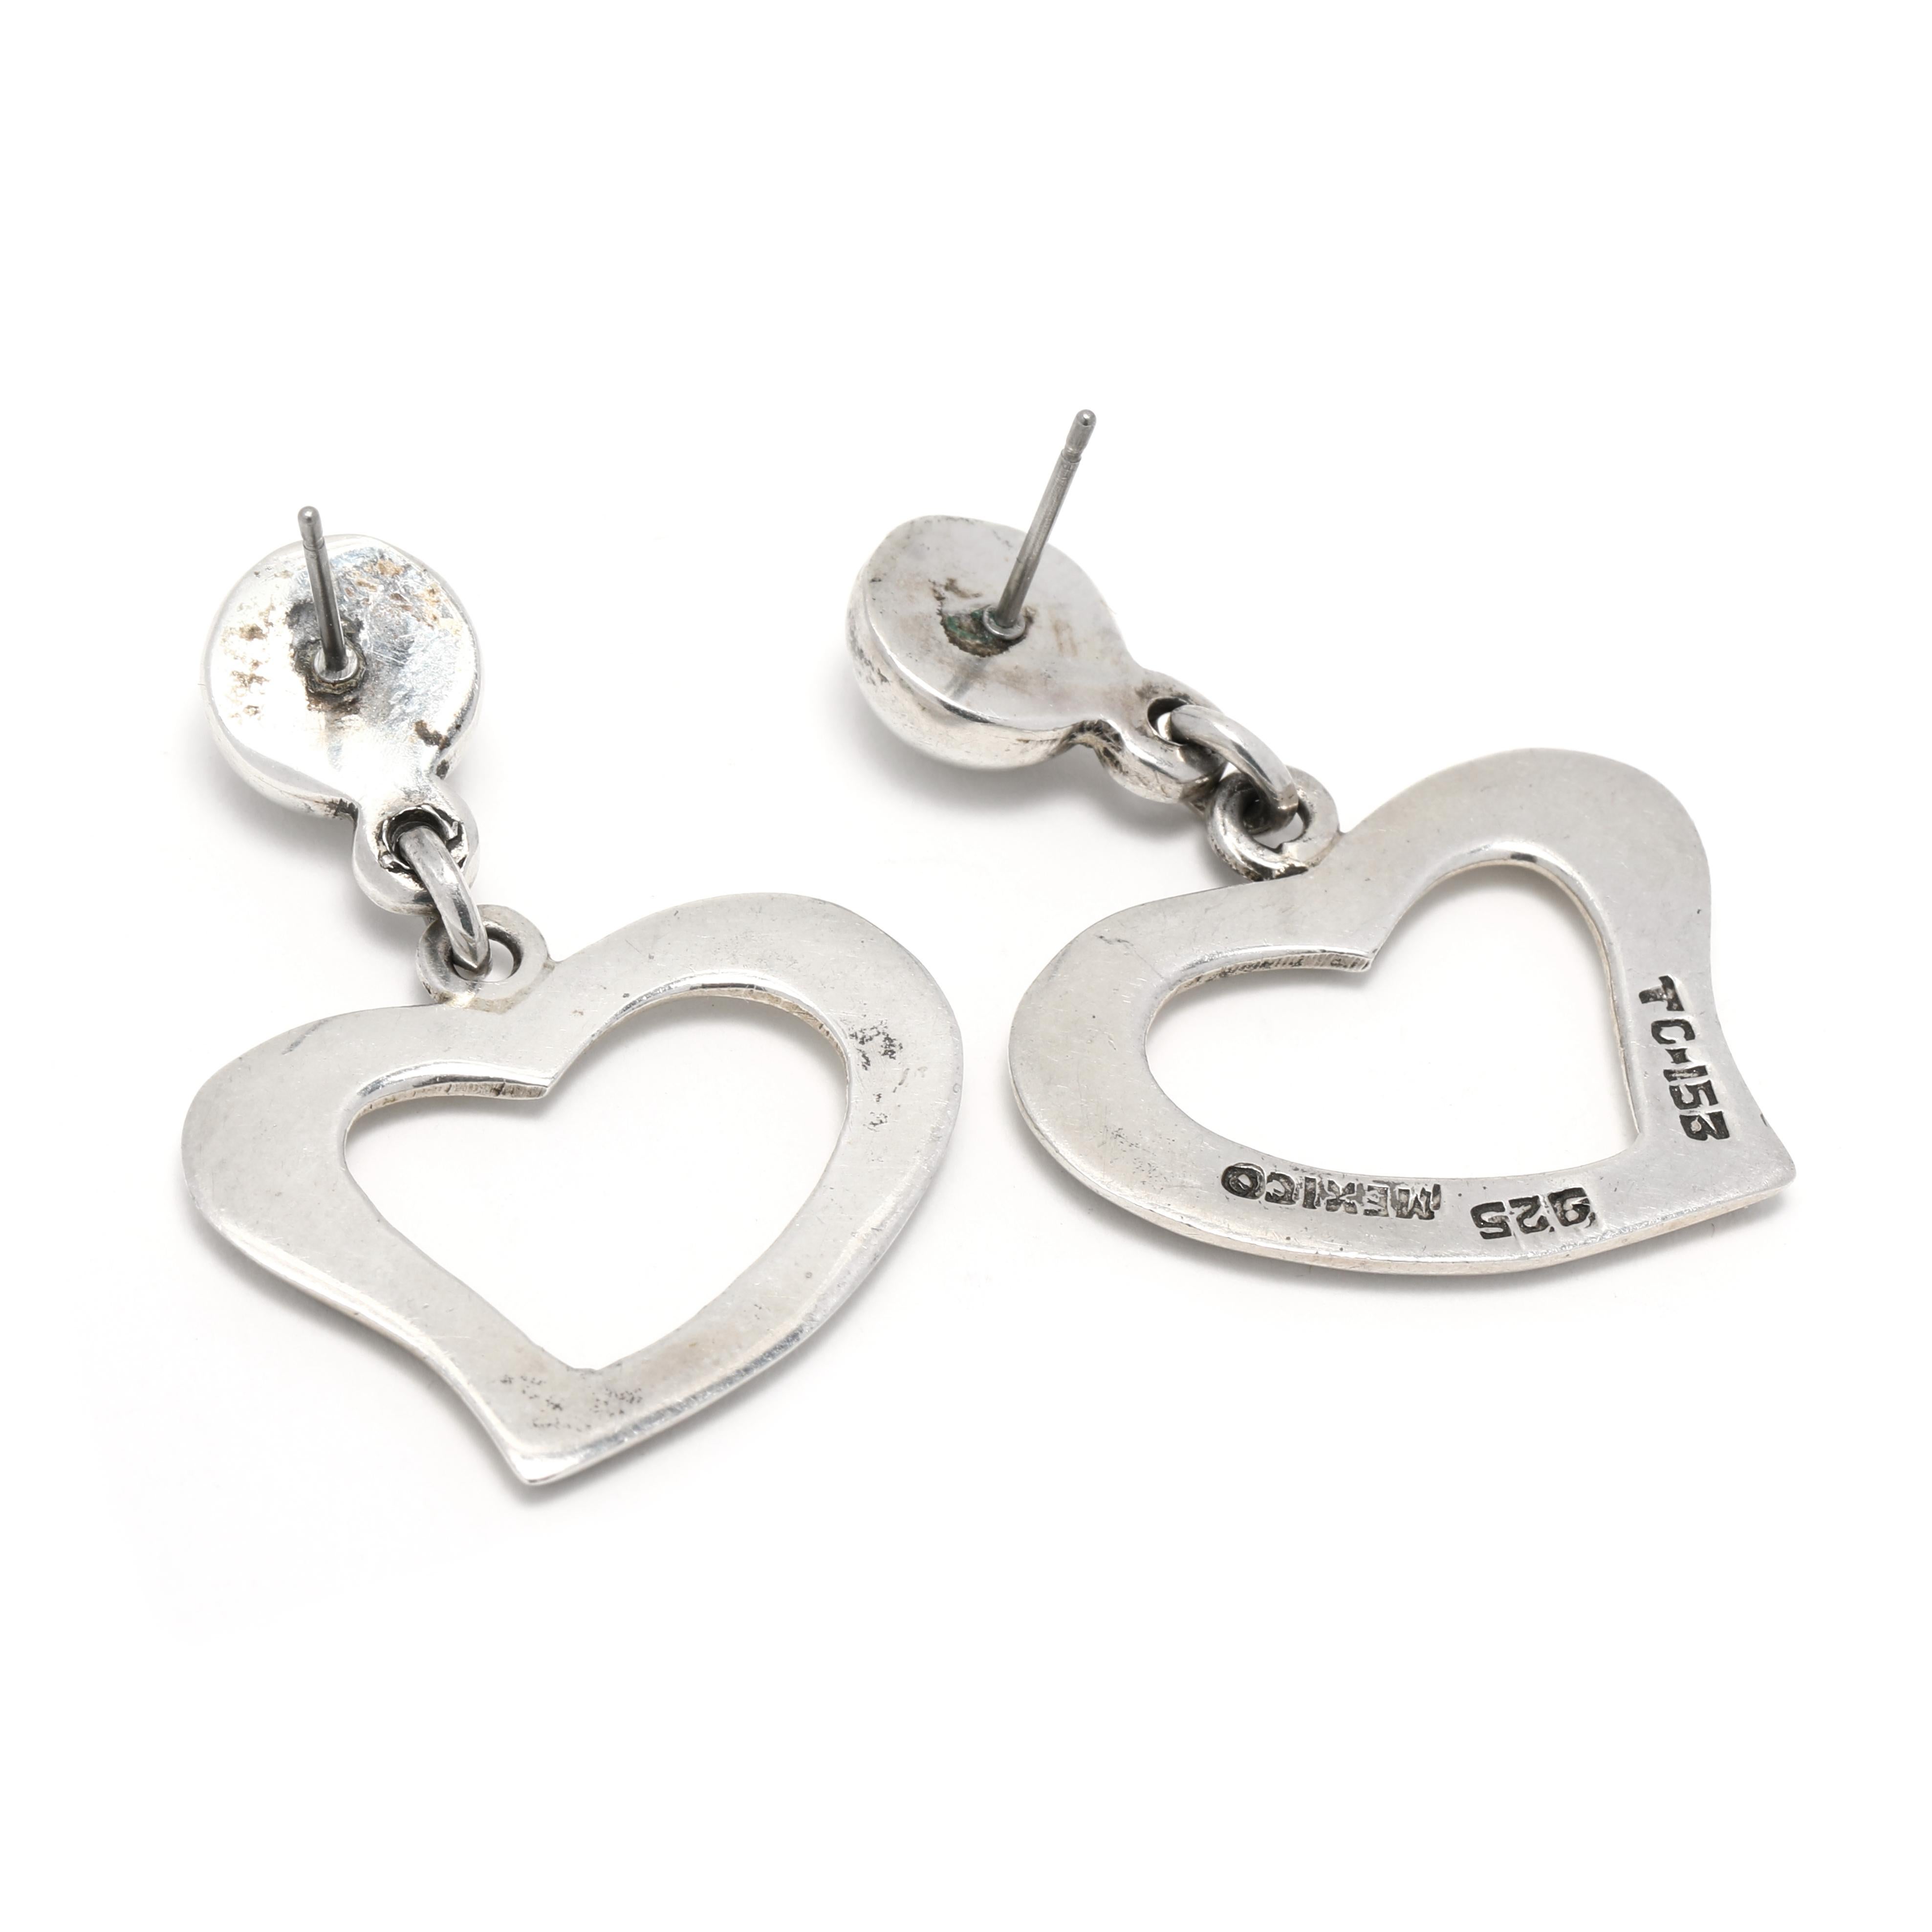 These unique Vintage Mexican Open Heart Dangle Earrings are handcrafted from Sterling Silver and measure 1.5 inches long. The large heart earrings feature a stunning open heart design, perfect for a special occasion or everyday wear. The lightweight